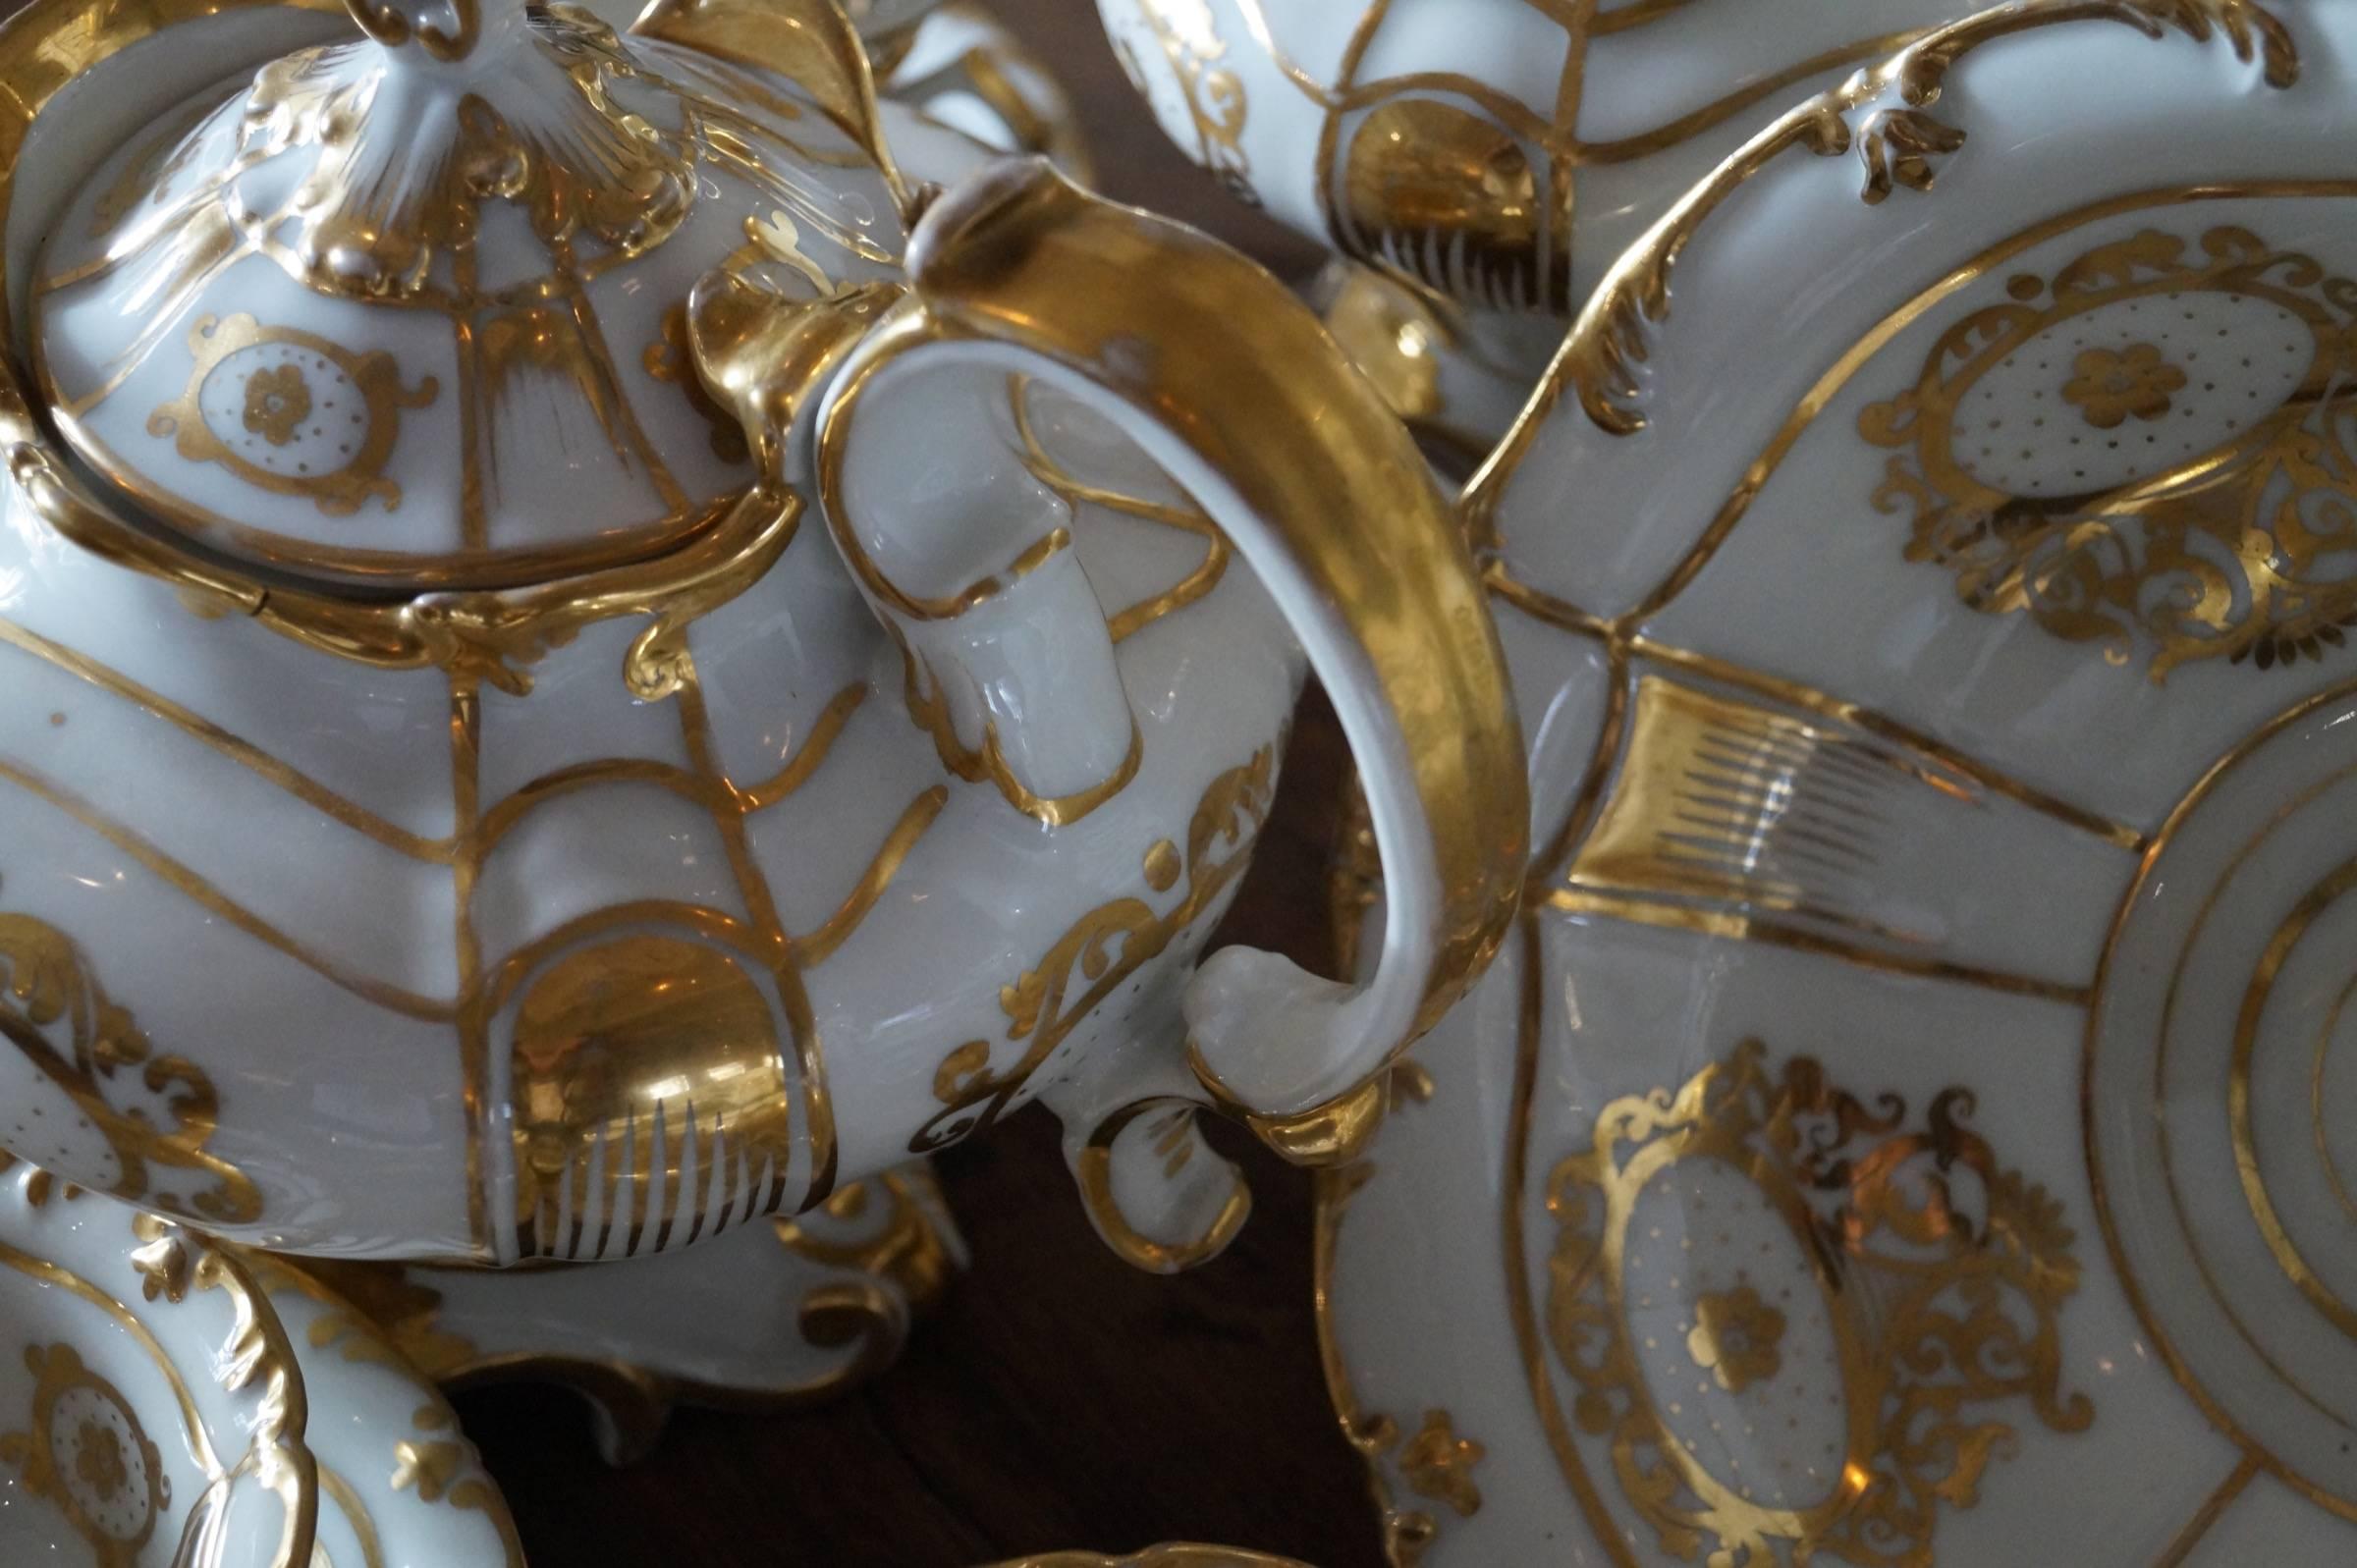 French Richly Gold Decorated Old Paris Porcelain Tea Service, France, circa 1880s